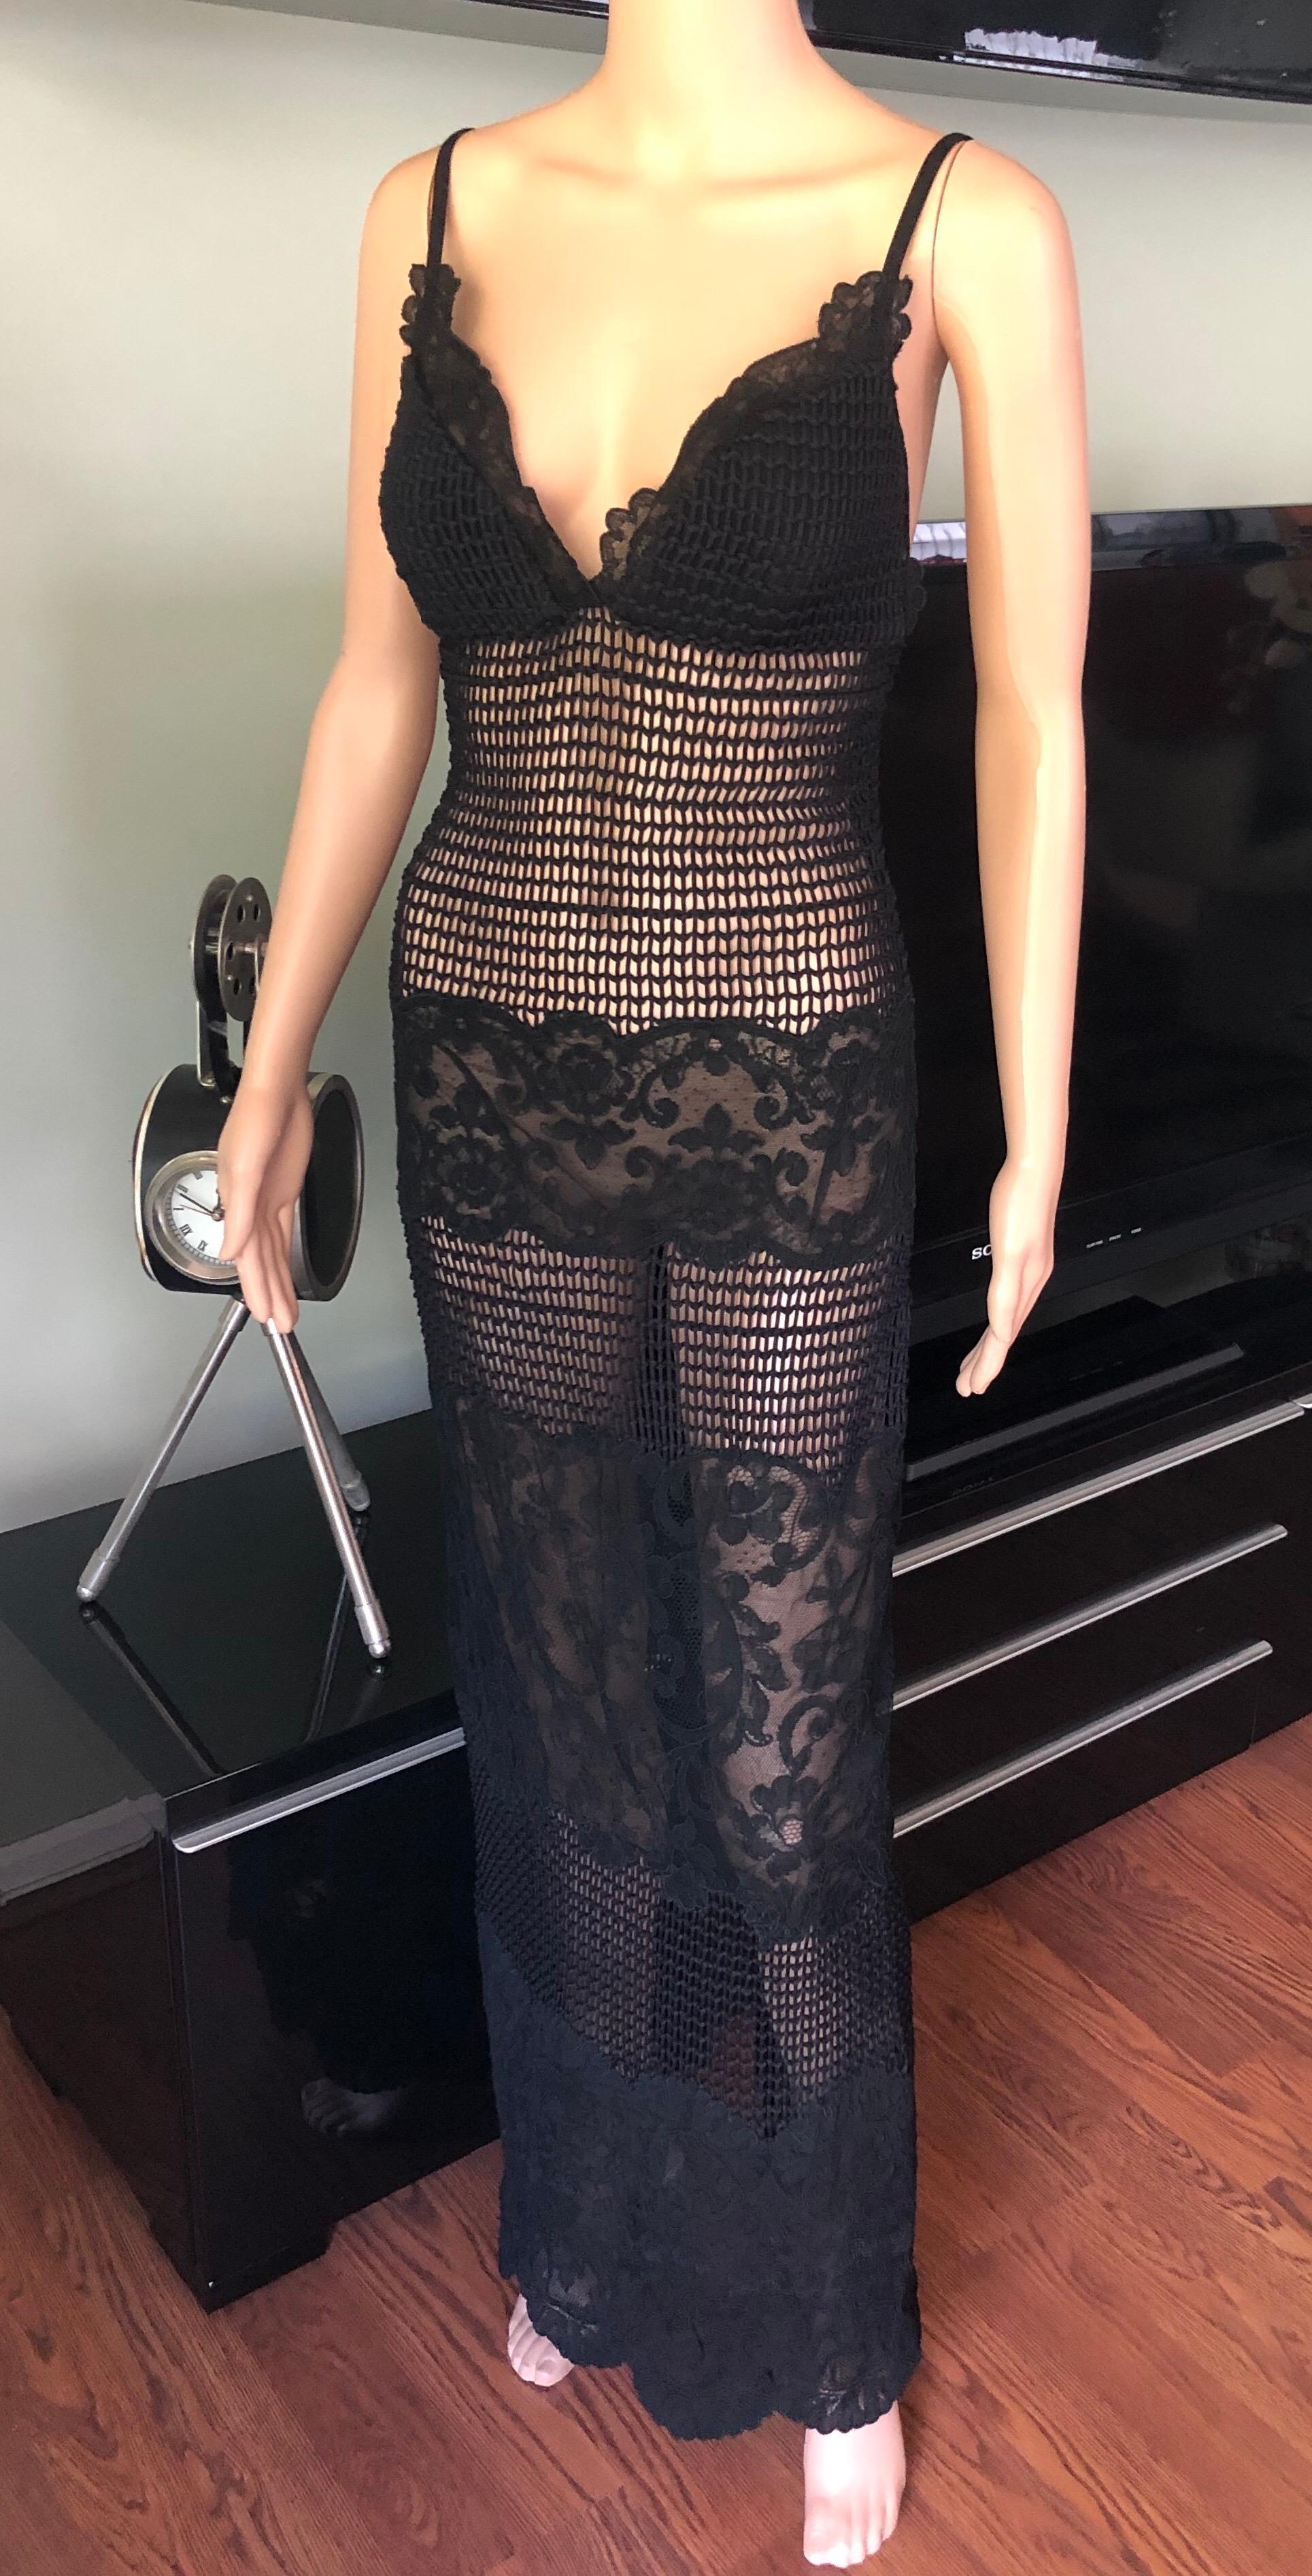 Gianni Versace F/W 1993 Runway Couture Sheer Knit Mesh Lace Evening Dress Gown In Excellent Condition For Sale In Naples, FL